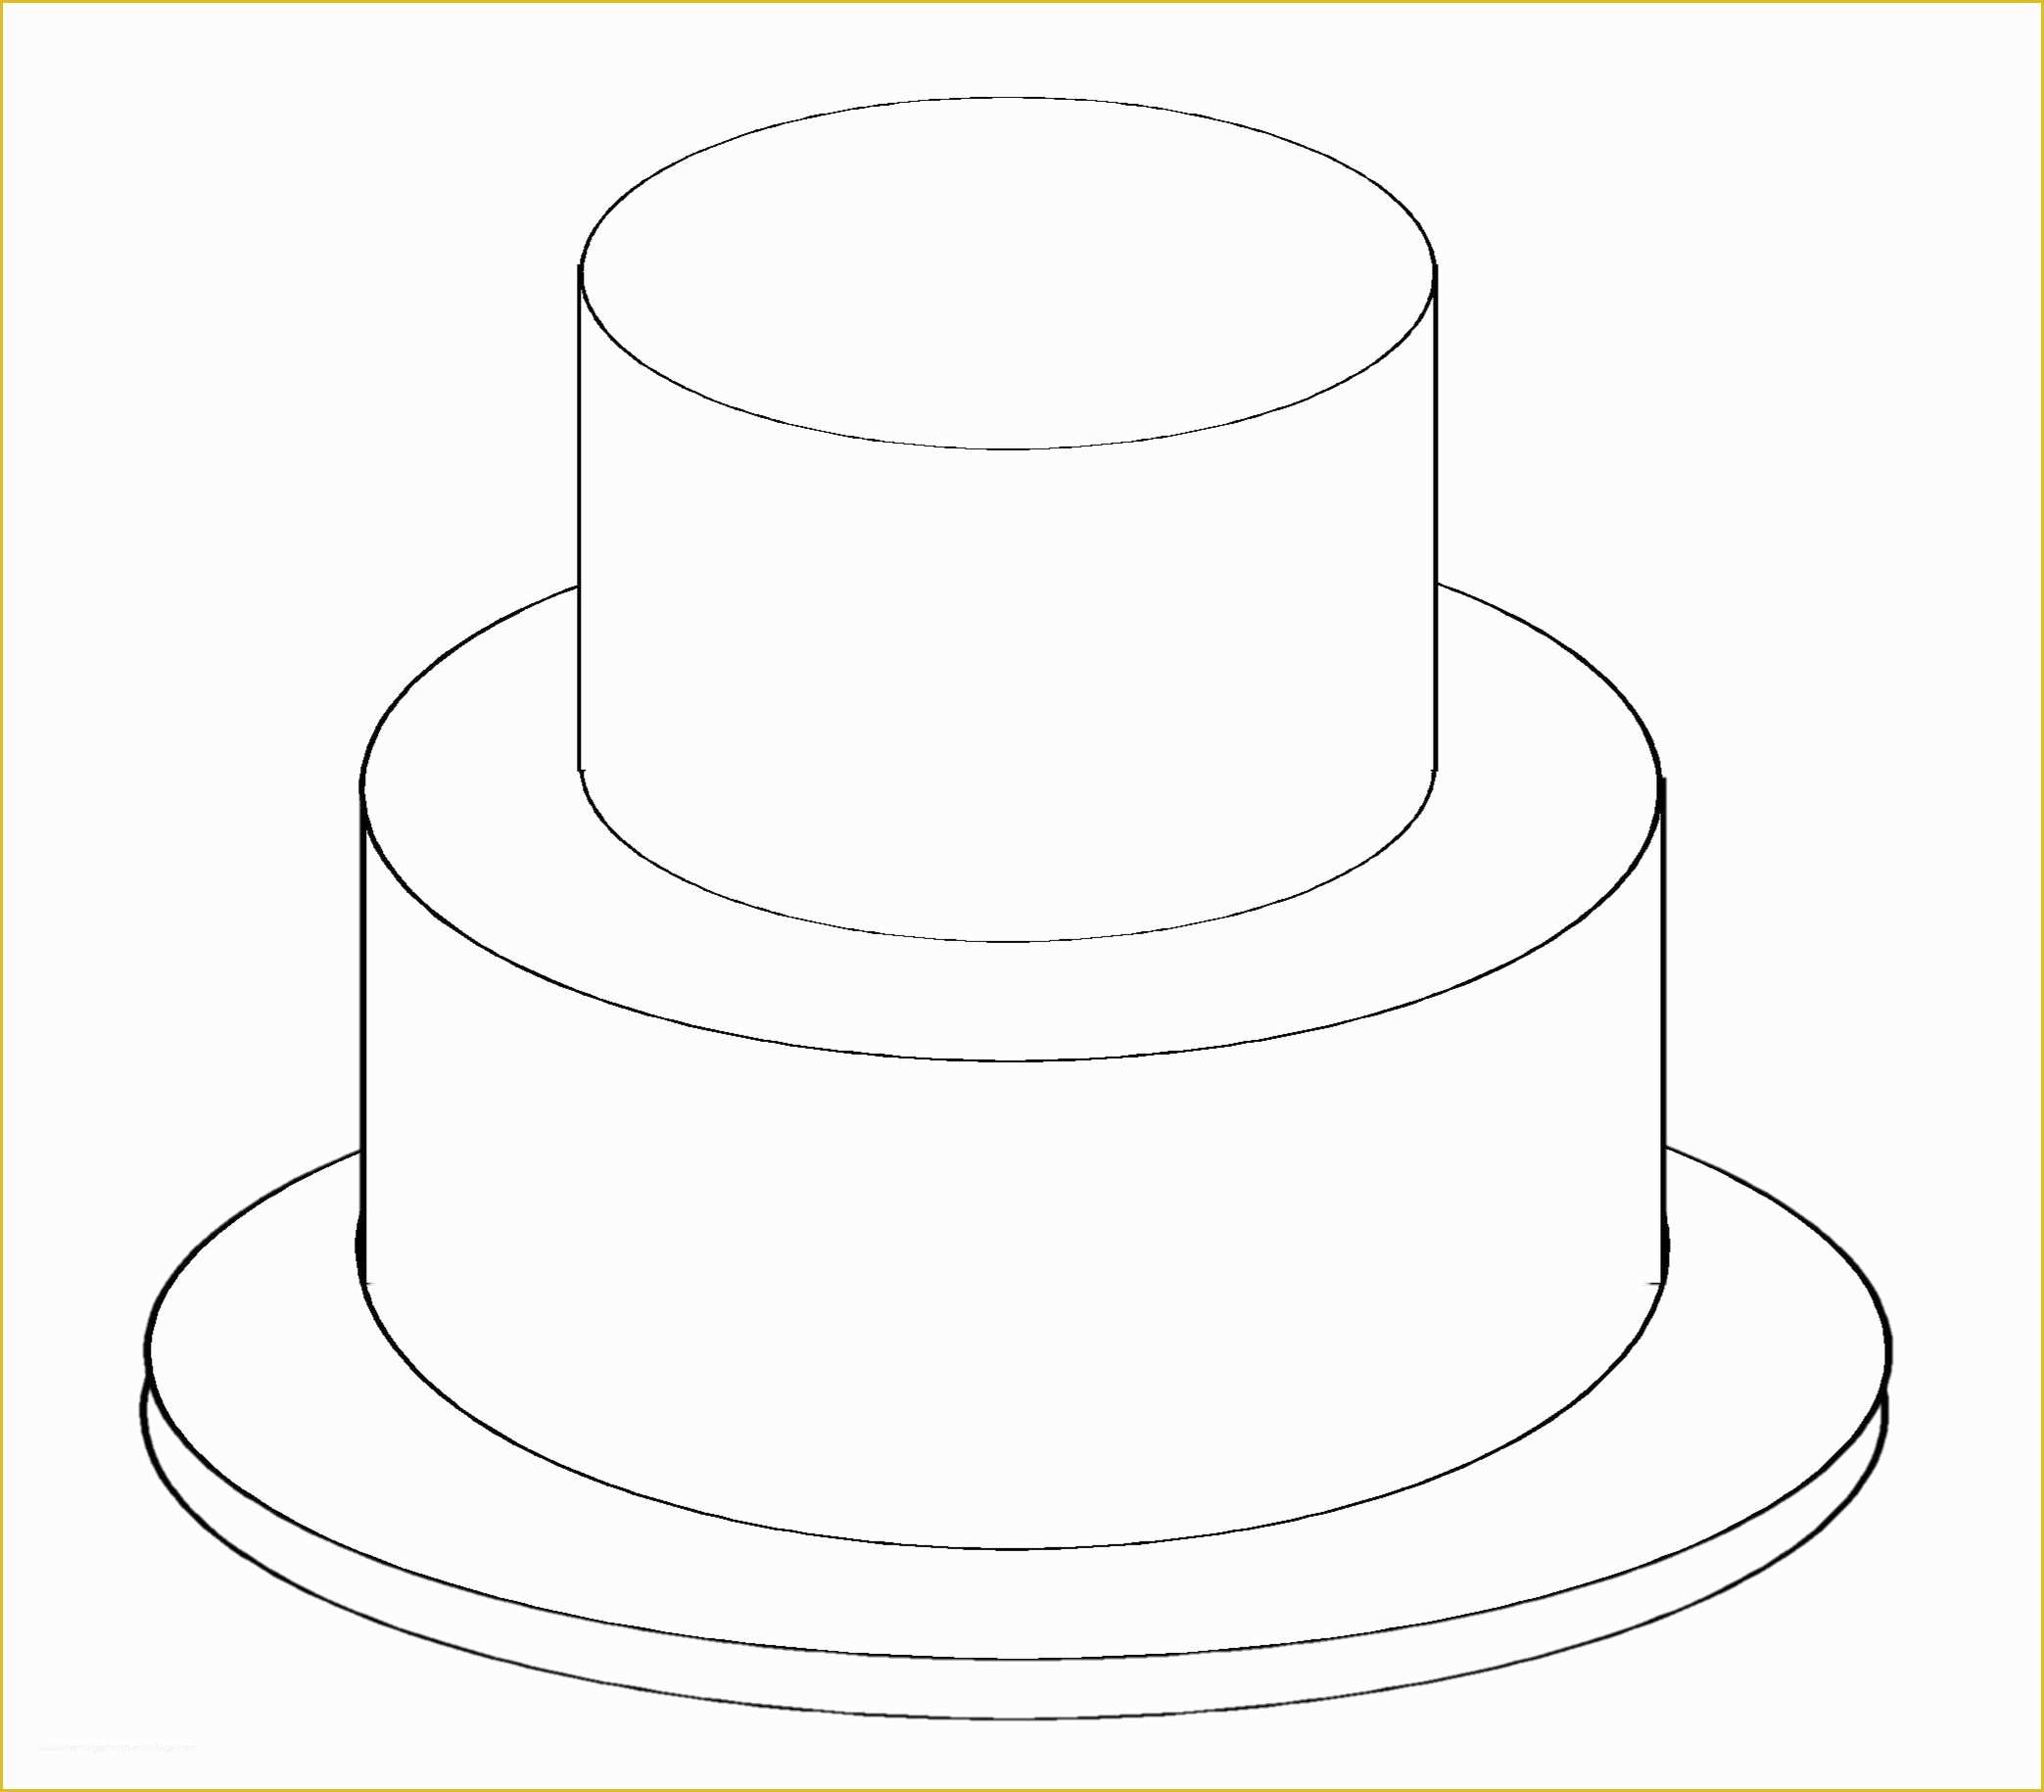 Free Cake Templates Print Of Wedding Cake Clipart Blank Pencil and In Color Wedding